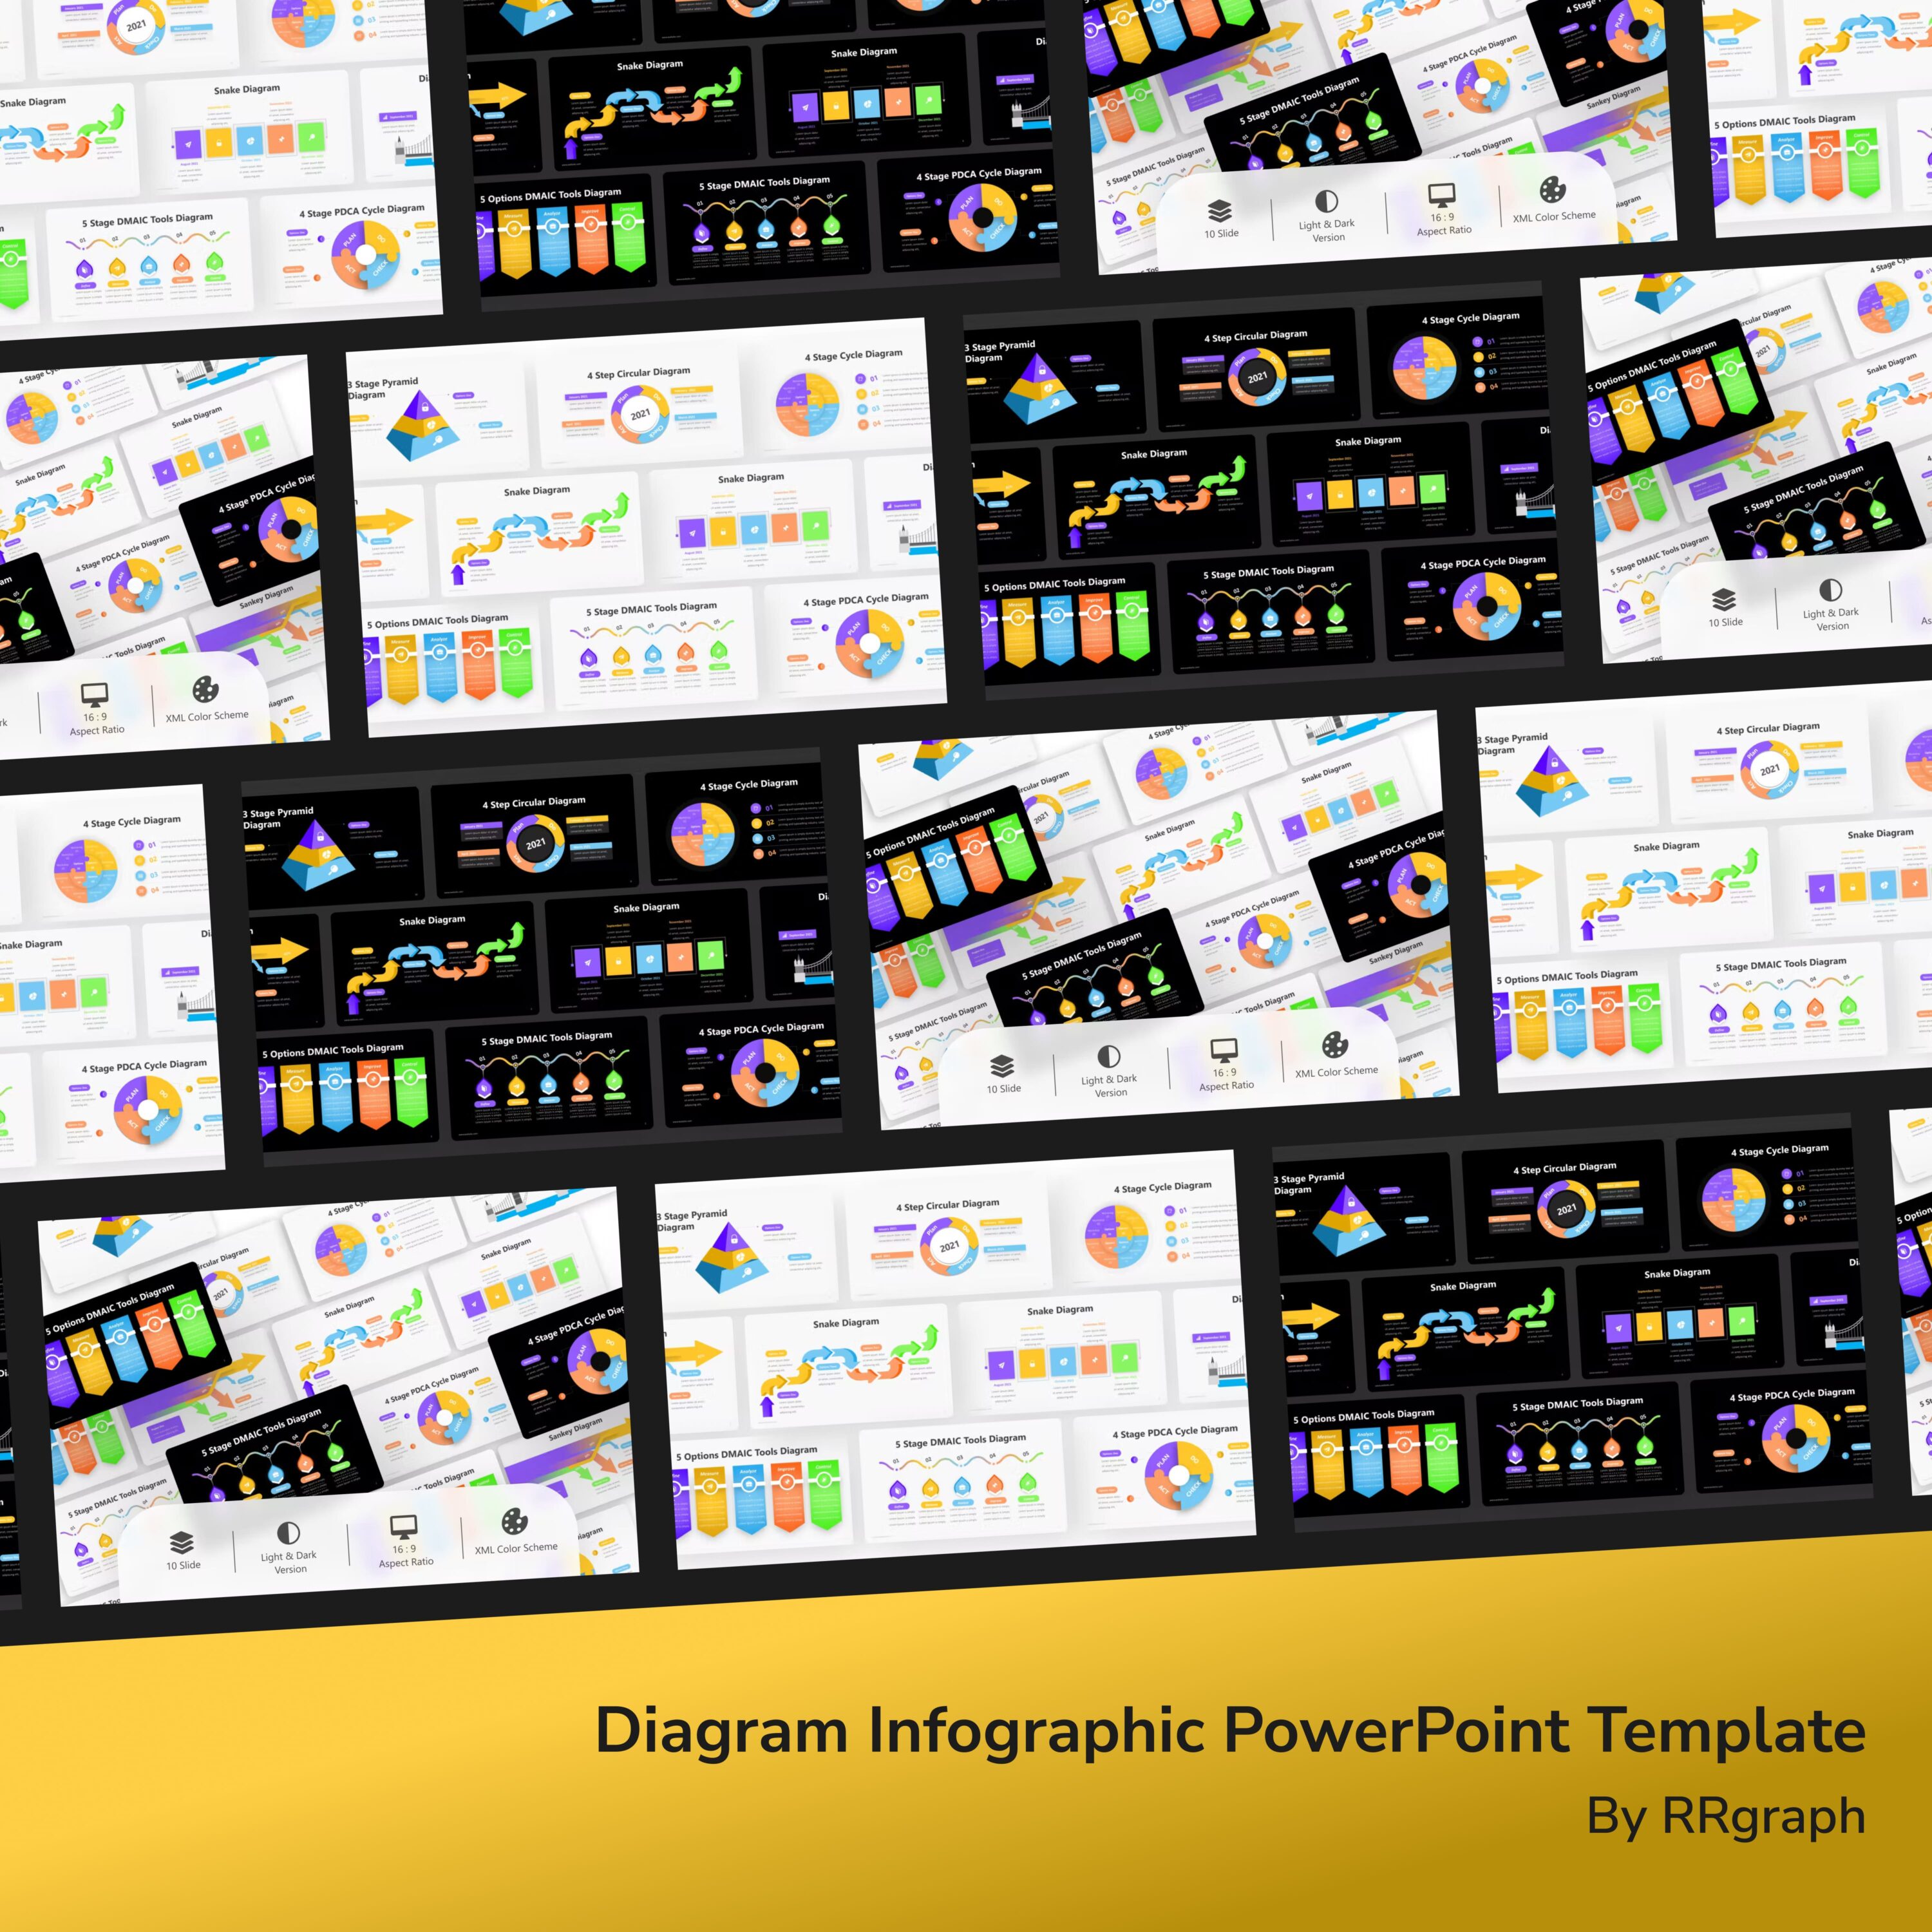 Diagram Infographic PowerPoint Template cover.